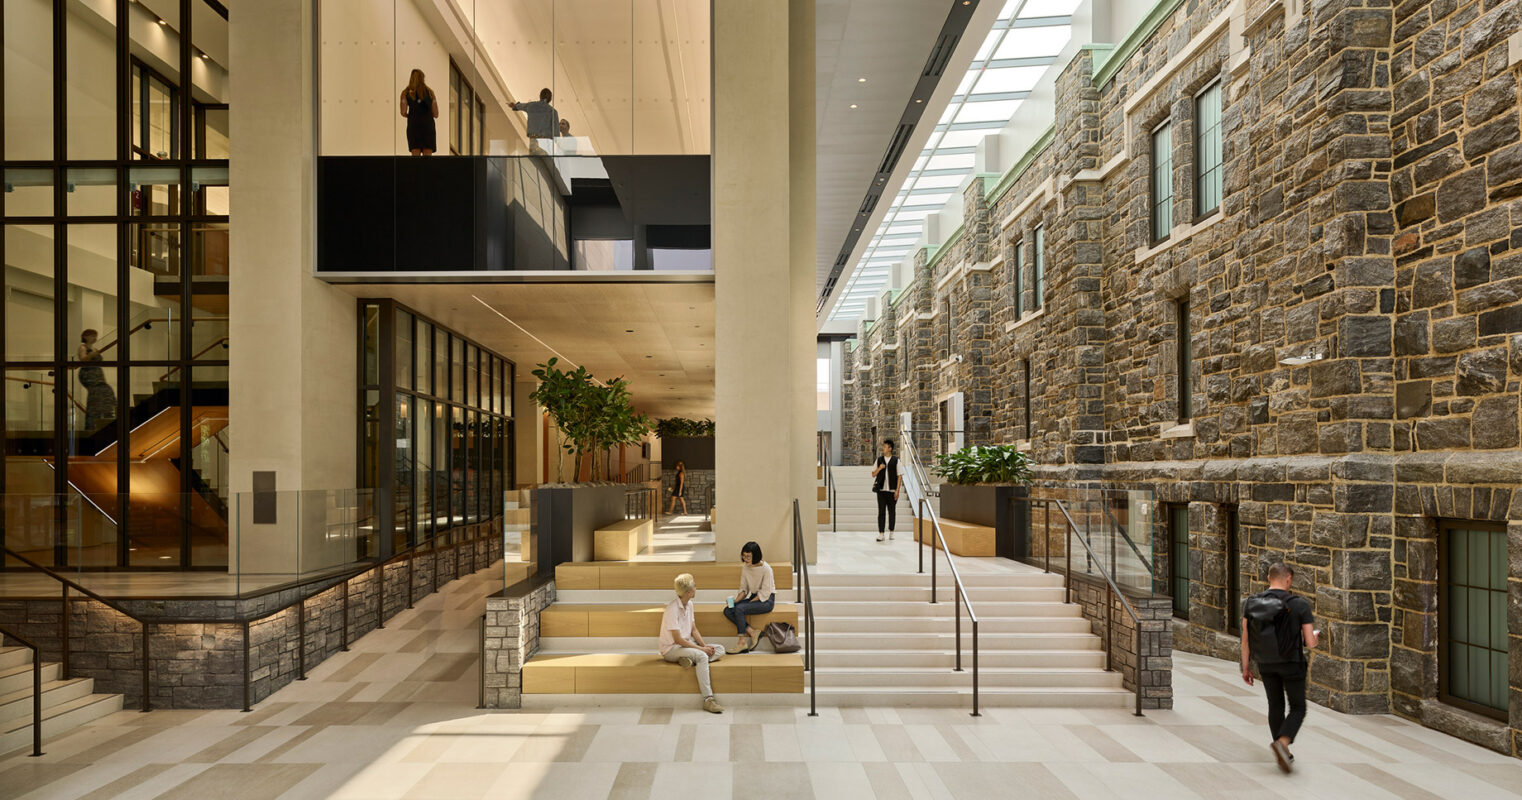 Modern atrium in a renovated building blending contemporary design with historical architecture, where people casually interact and traverse the space.